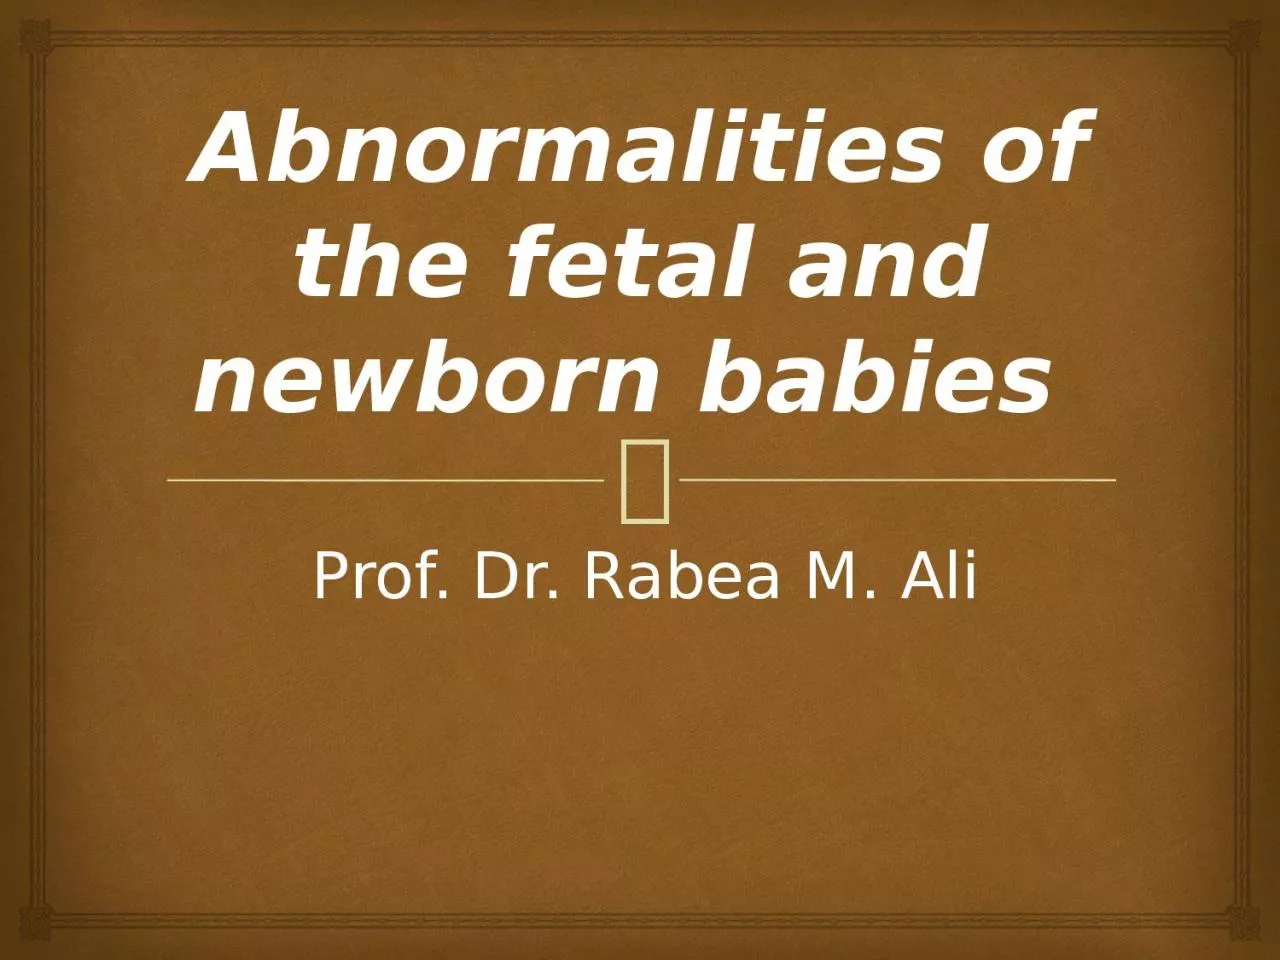 Abnormalities of the fetal and newborn babies